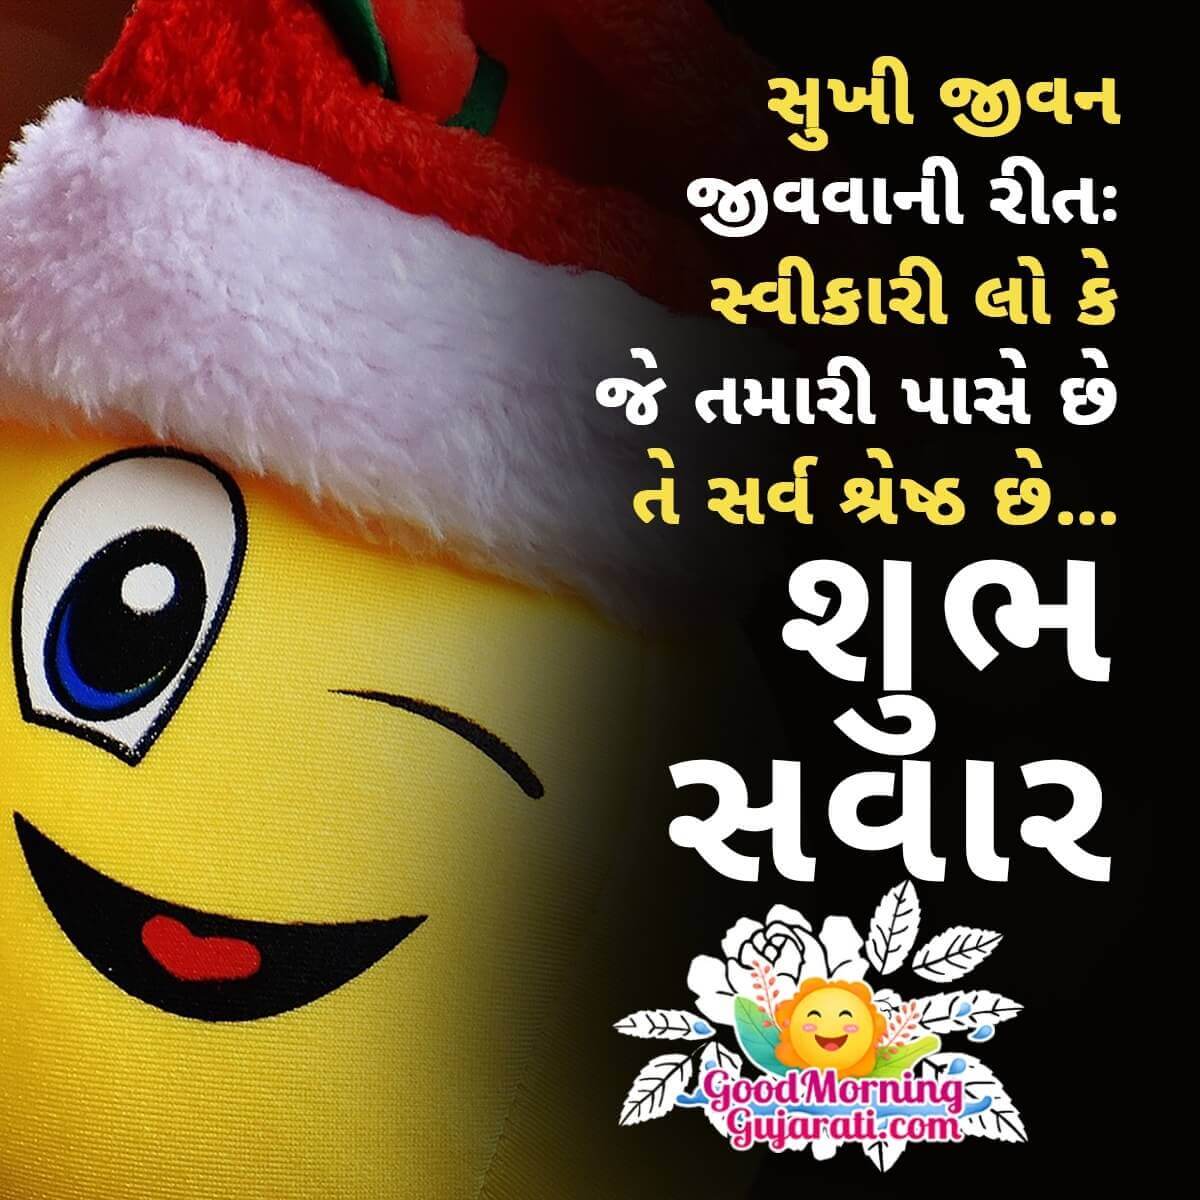 Good Morning Gujarati Thoughts Pictures